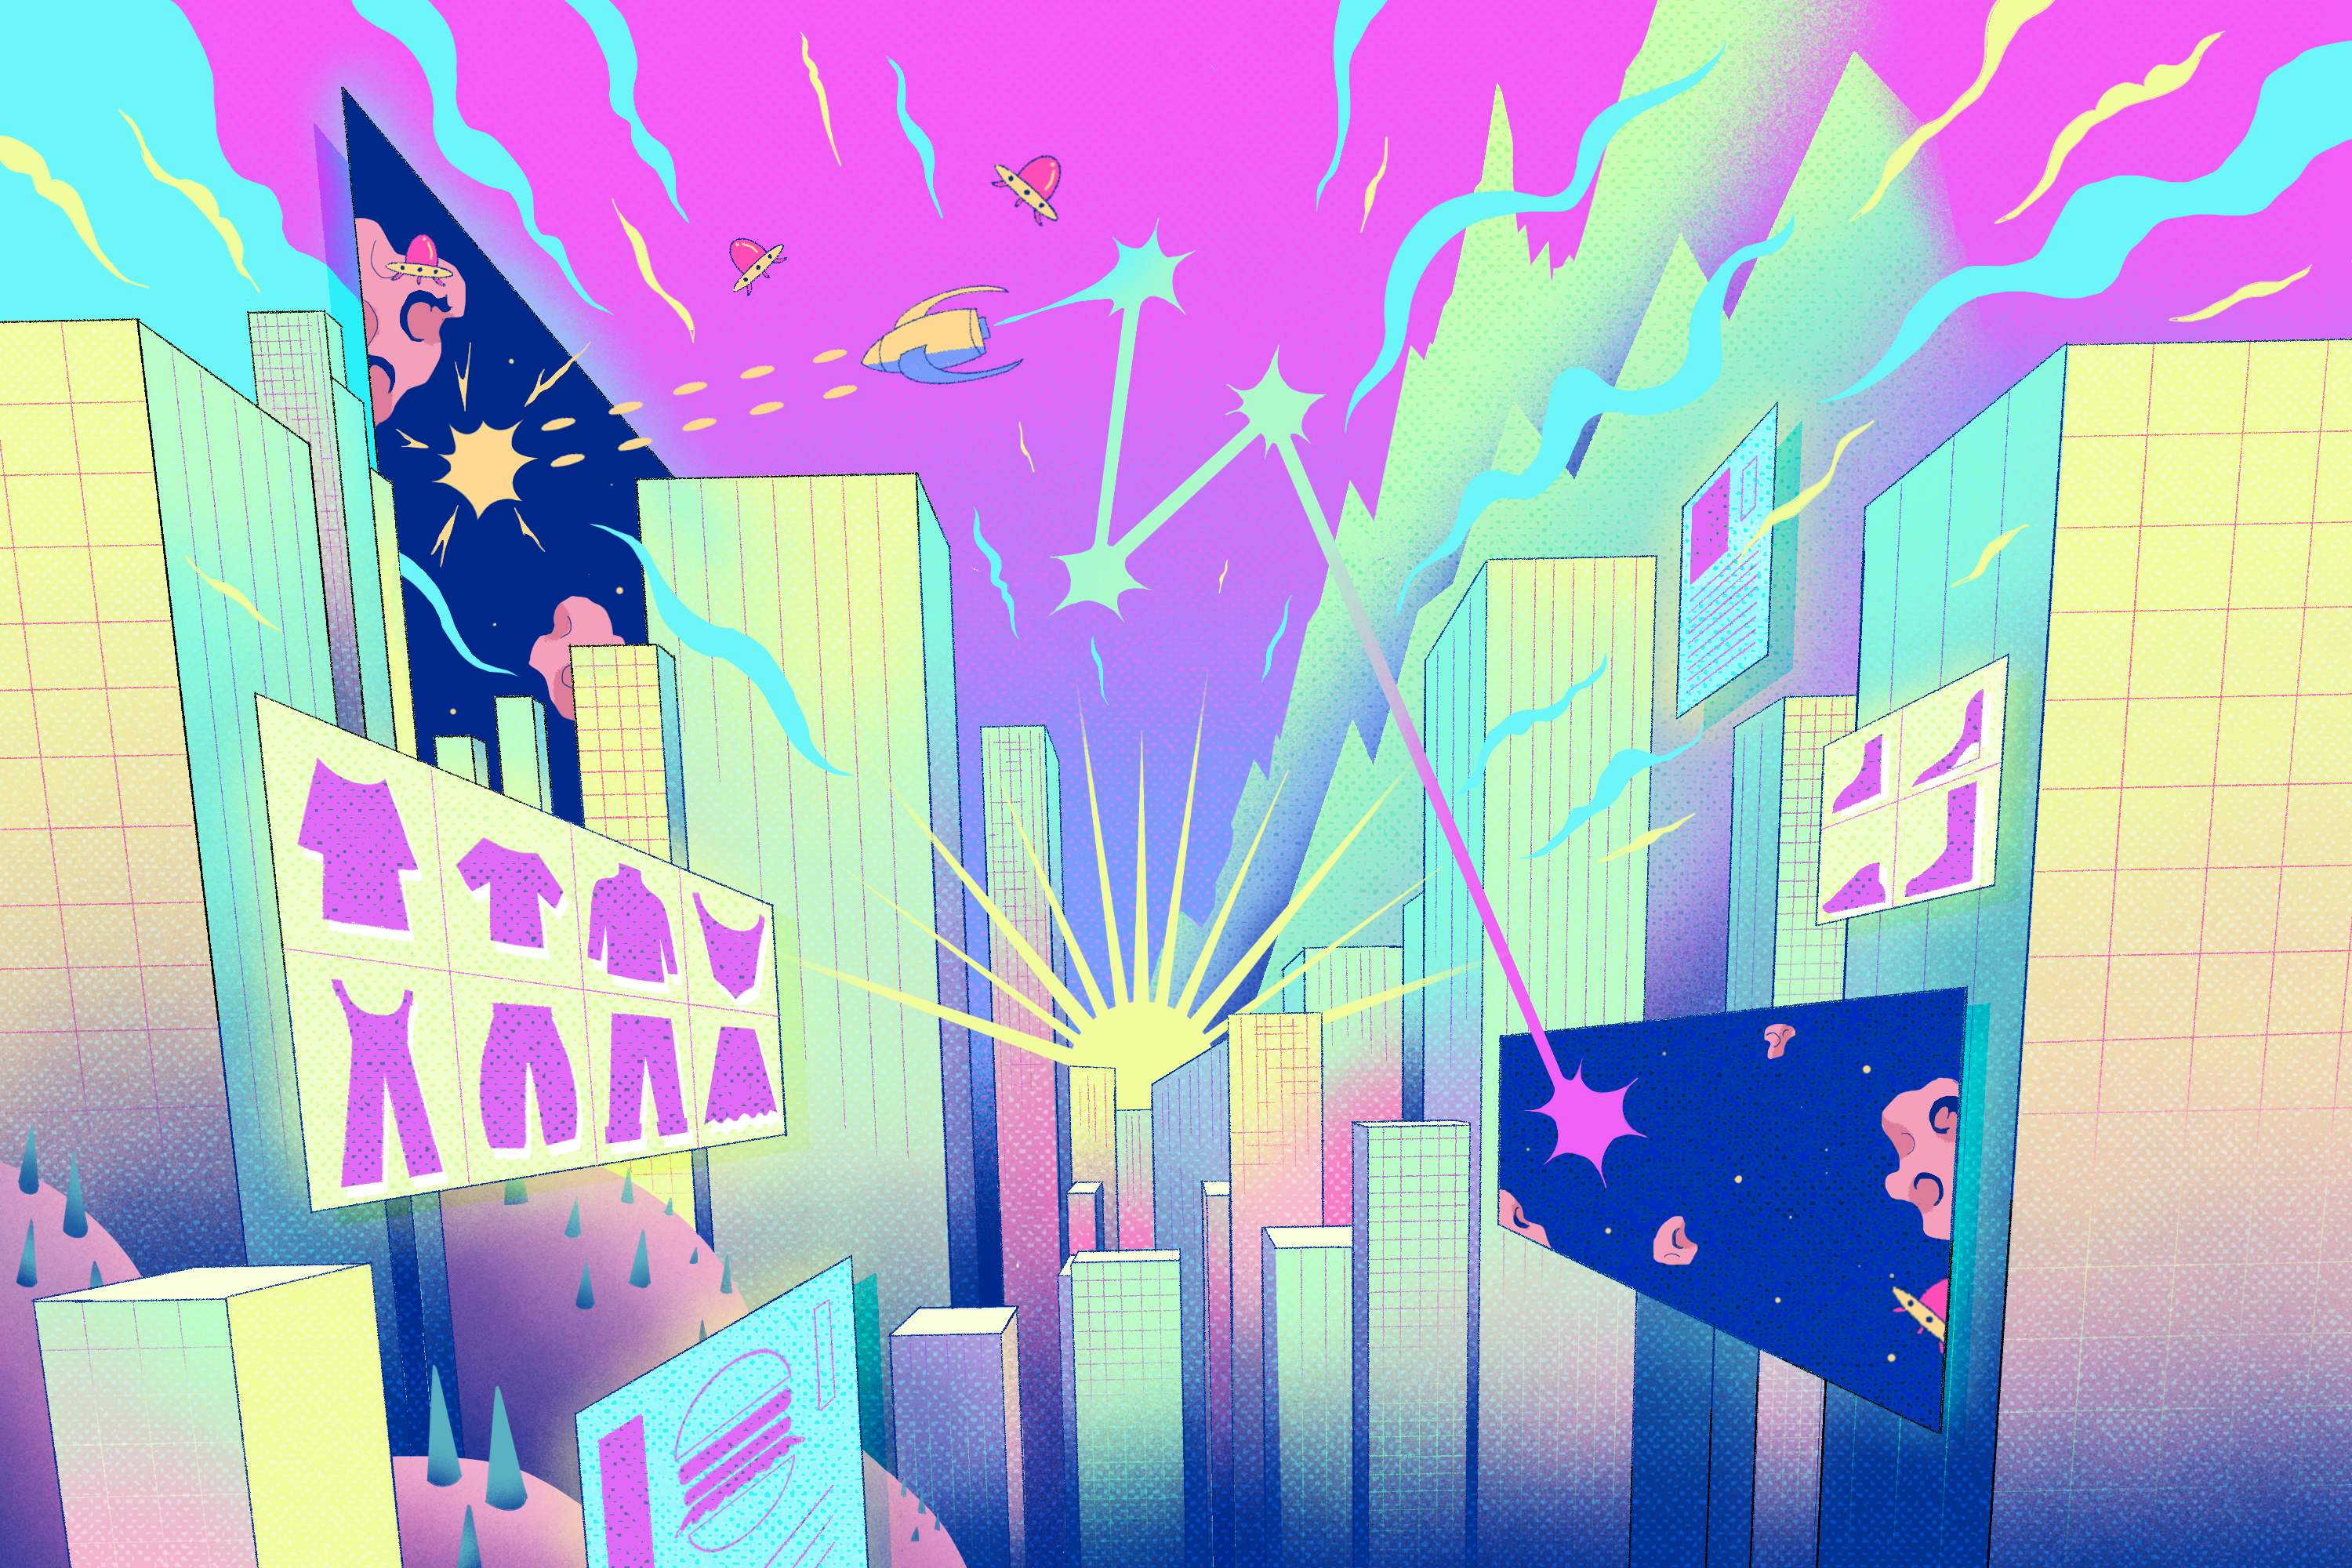 Brightly colored abstract illustration of buildings and billboards against a purple sky